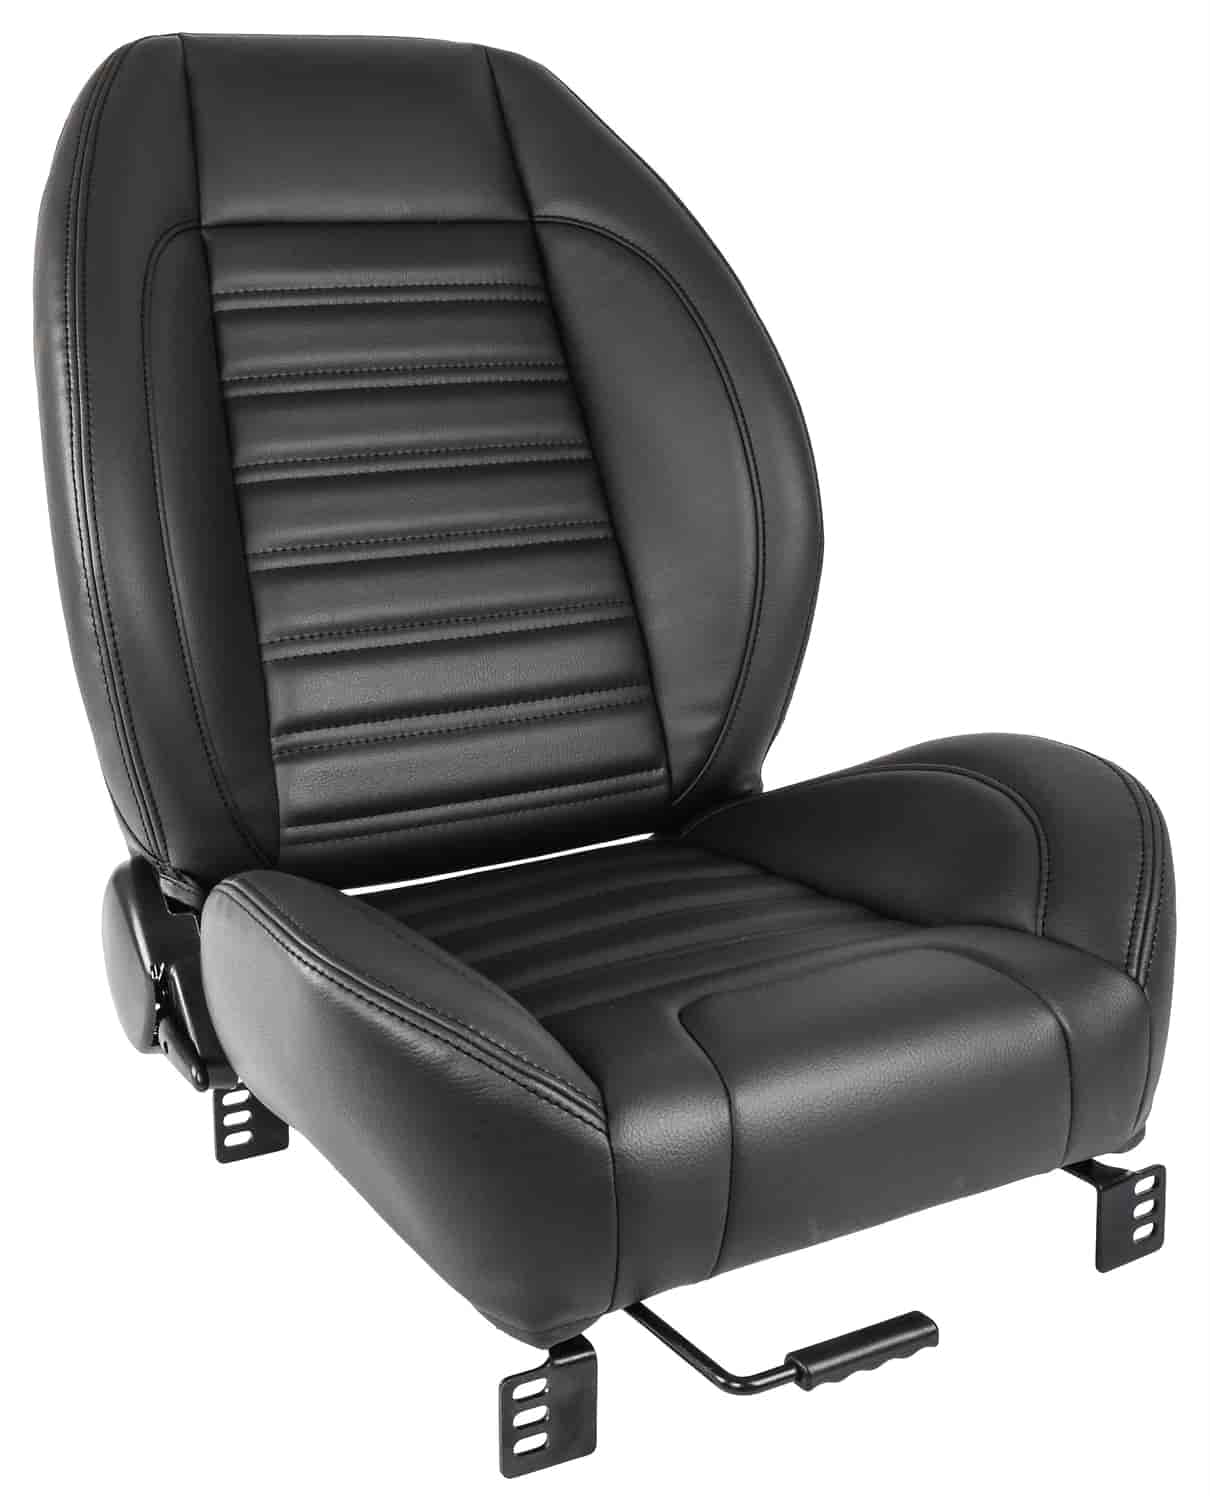 Pro-Series Low-Back Seat, Right/Passenger Side [Charcoal with Black Stitching]